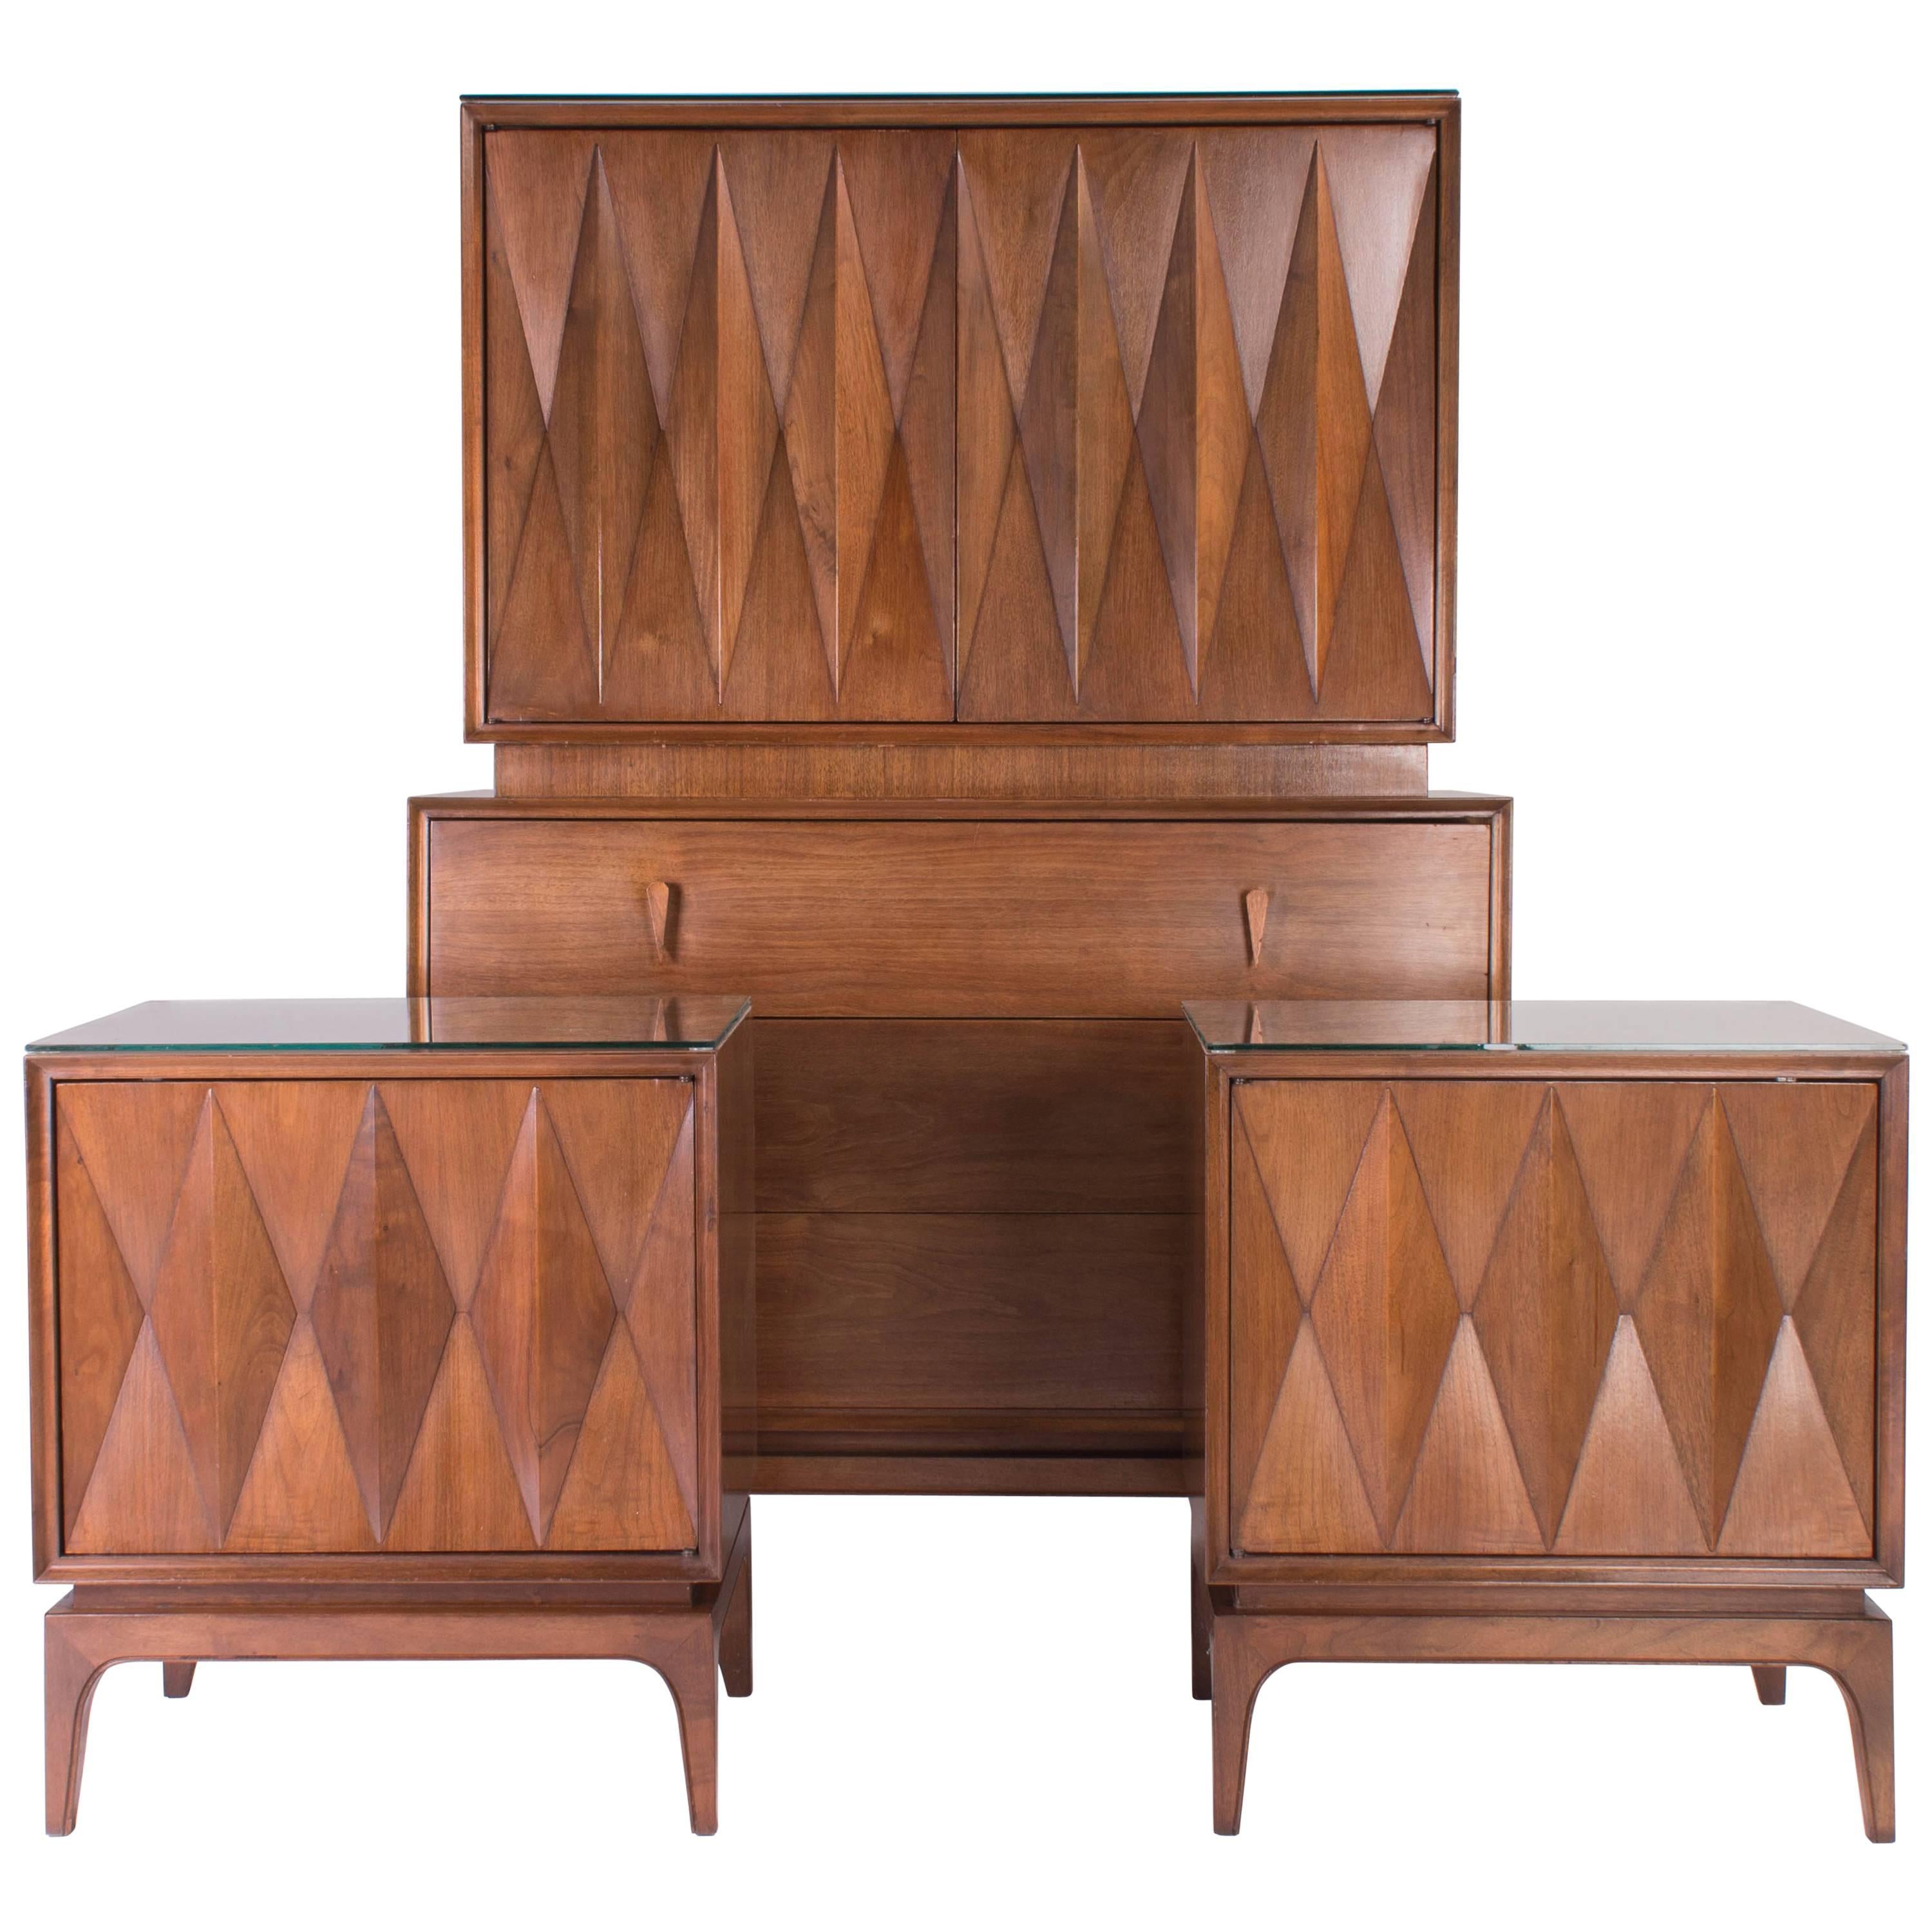 Mid-Century Modern Teak Cabinets by Albert Parvin for American of Martinsville